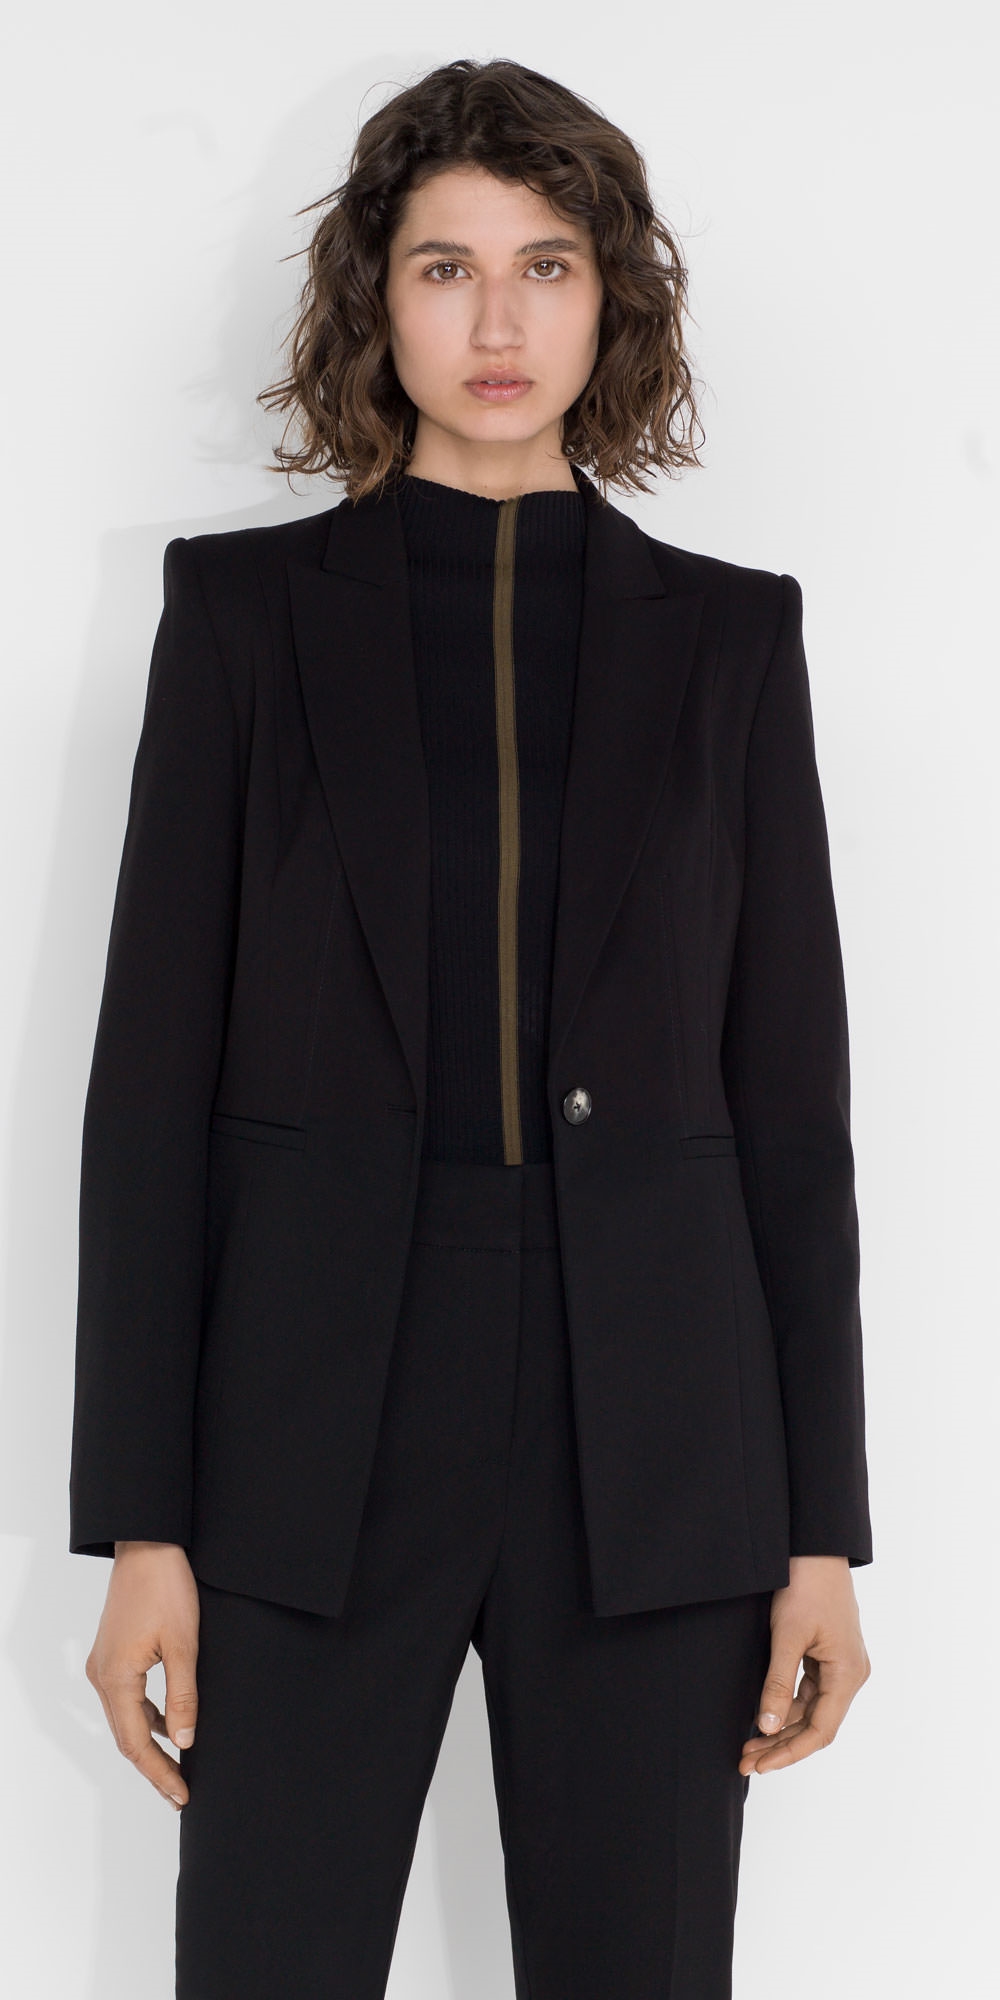 Classic Blazer | Buy Jackets and Coats Online - Cue